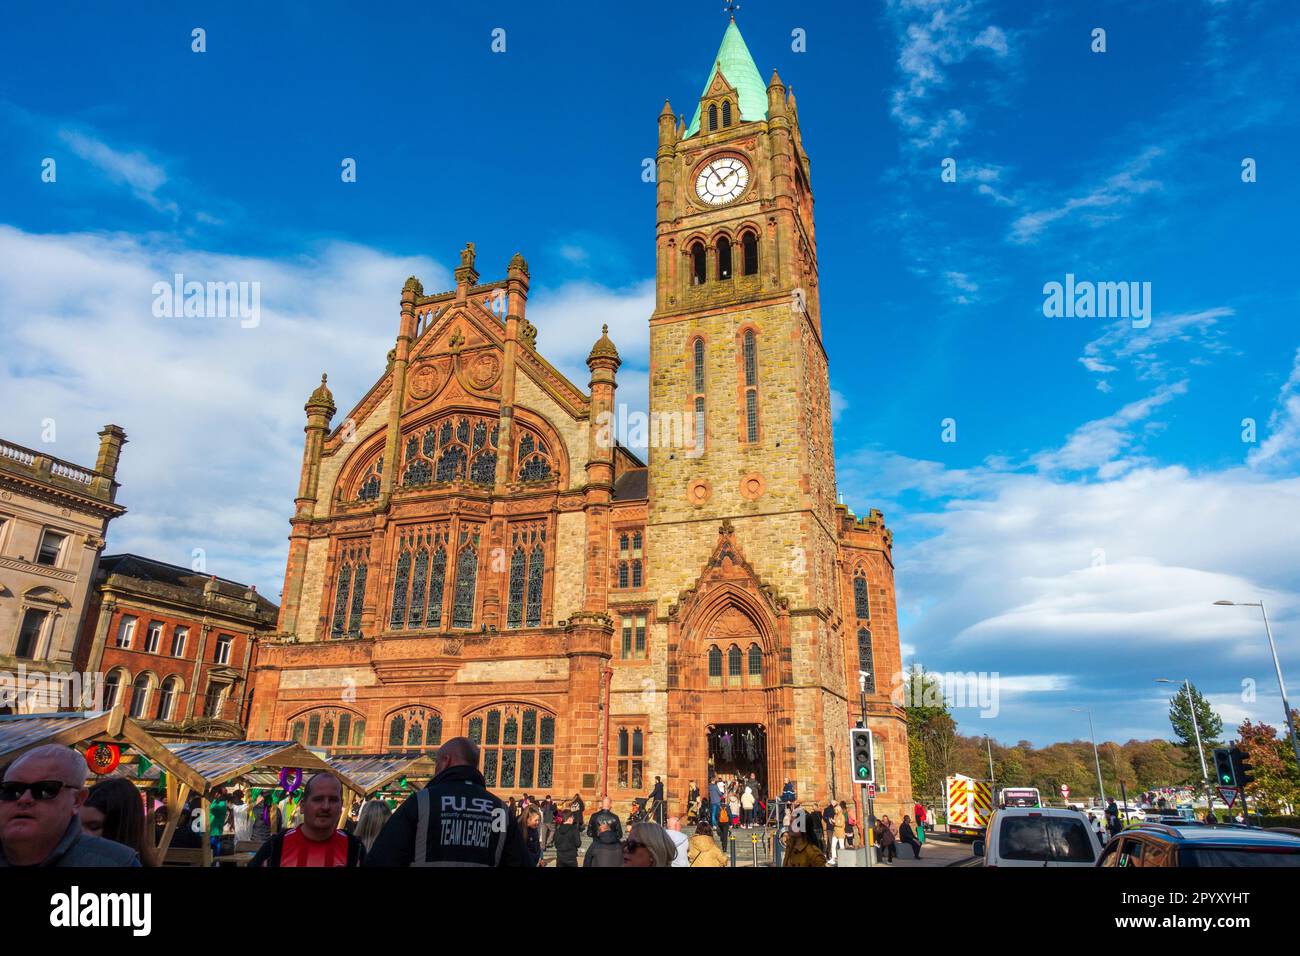 The Guildhall in Derry / Londonderry, County Londonderry, Northern Ireland, UK Stock Photo